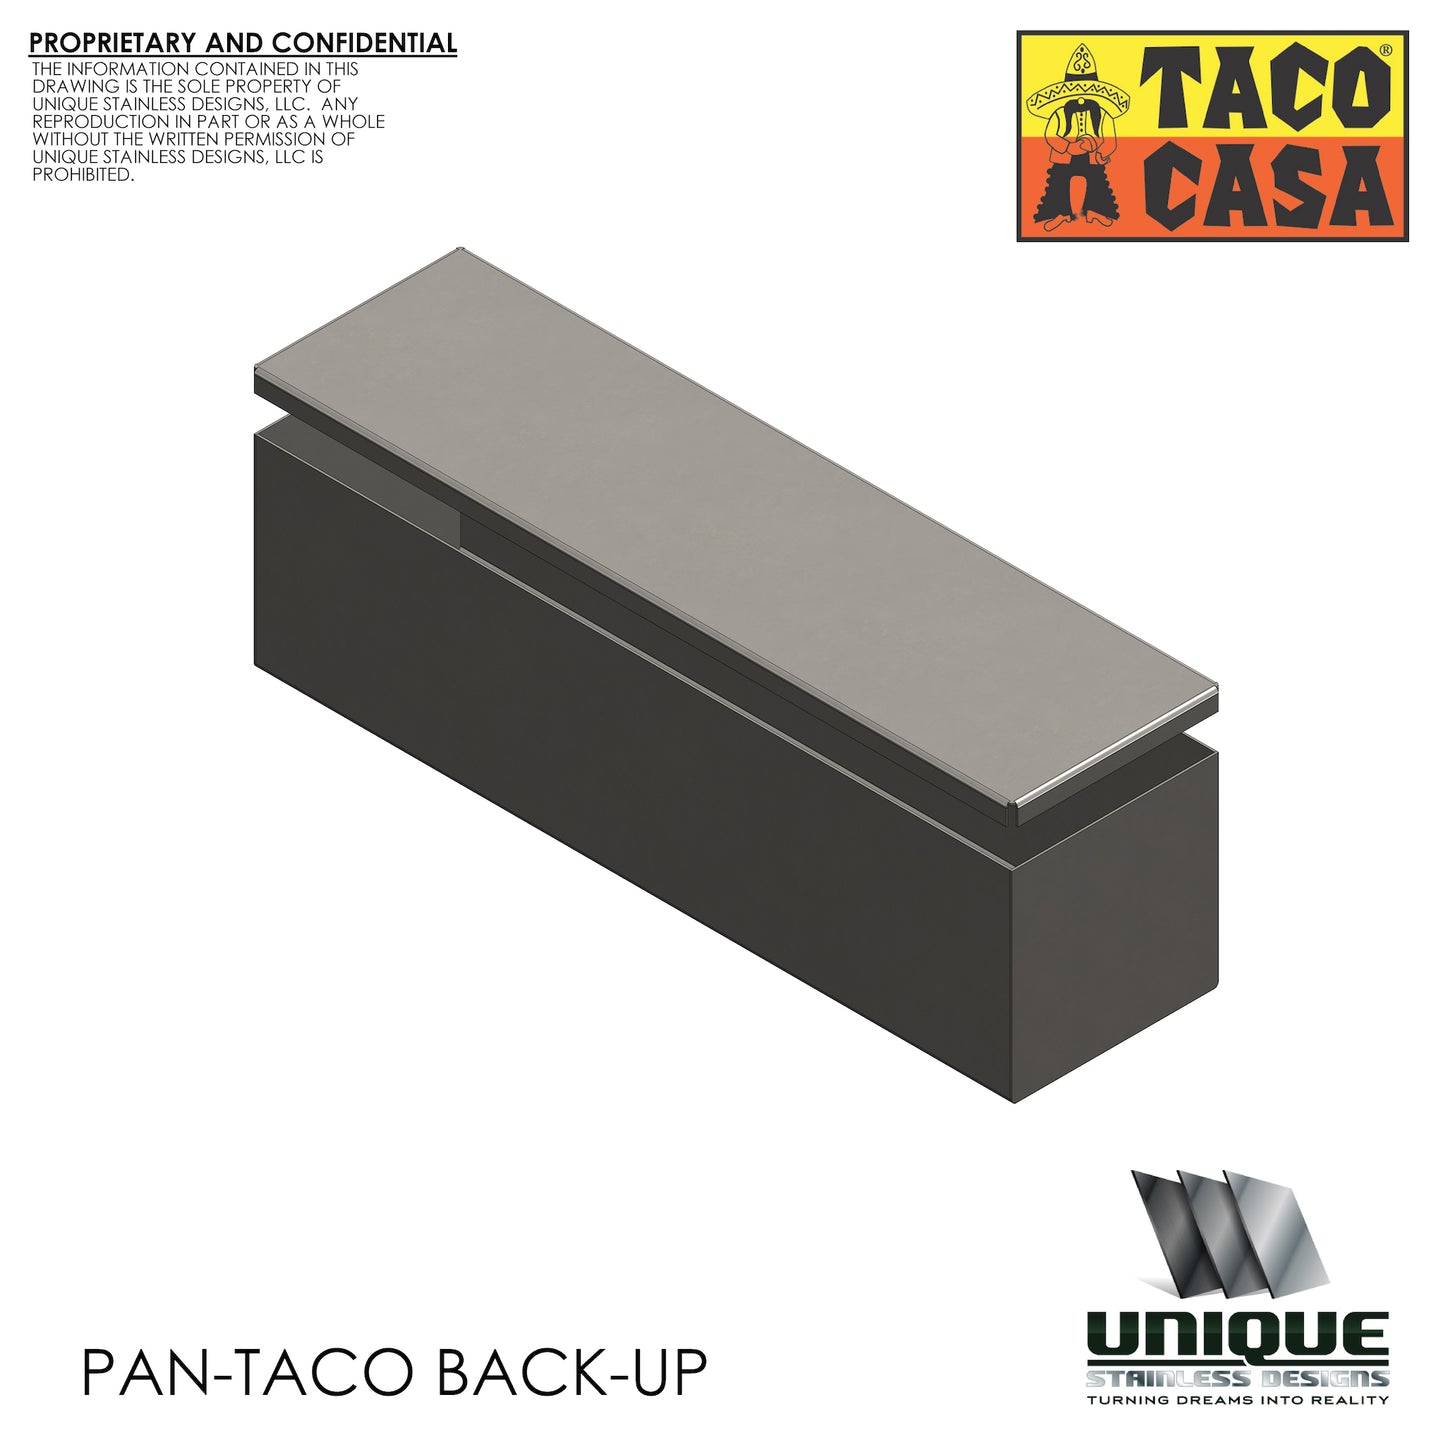 Pan-Taco Back-up with Lid